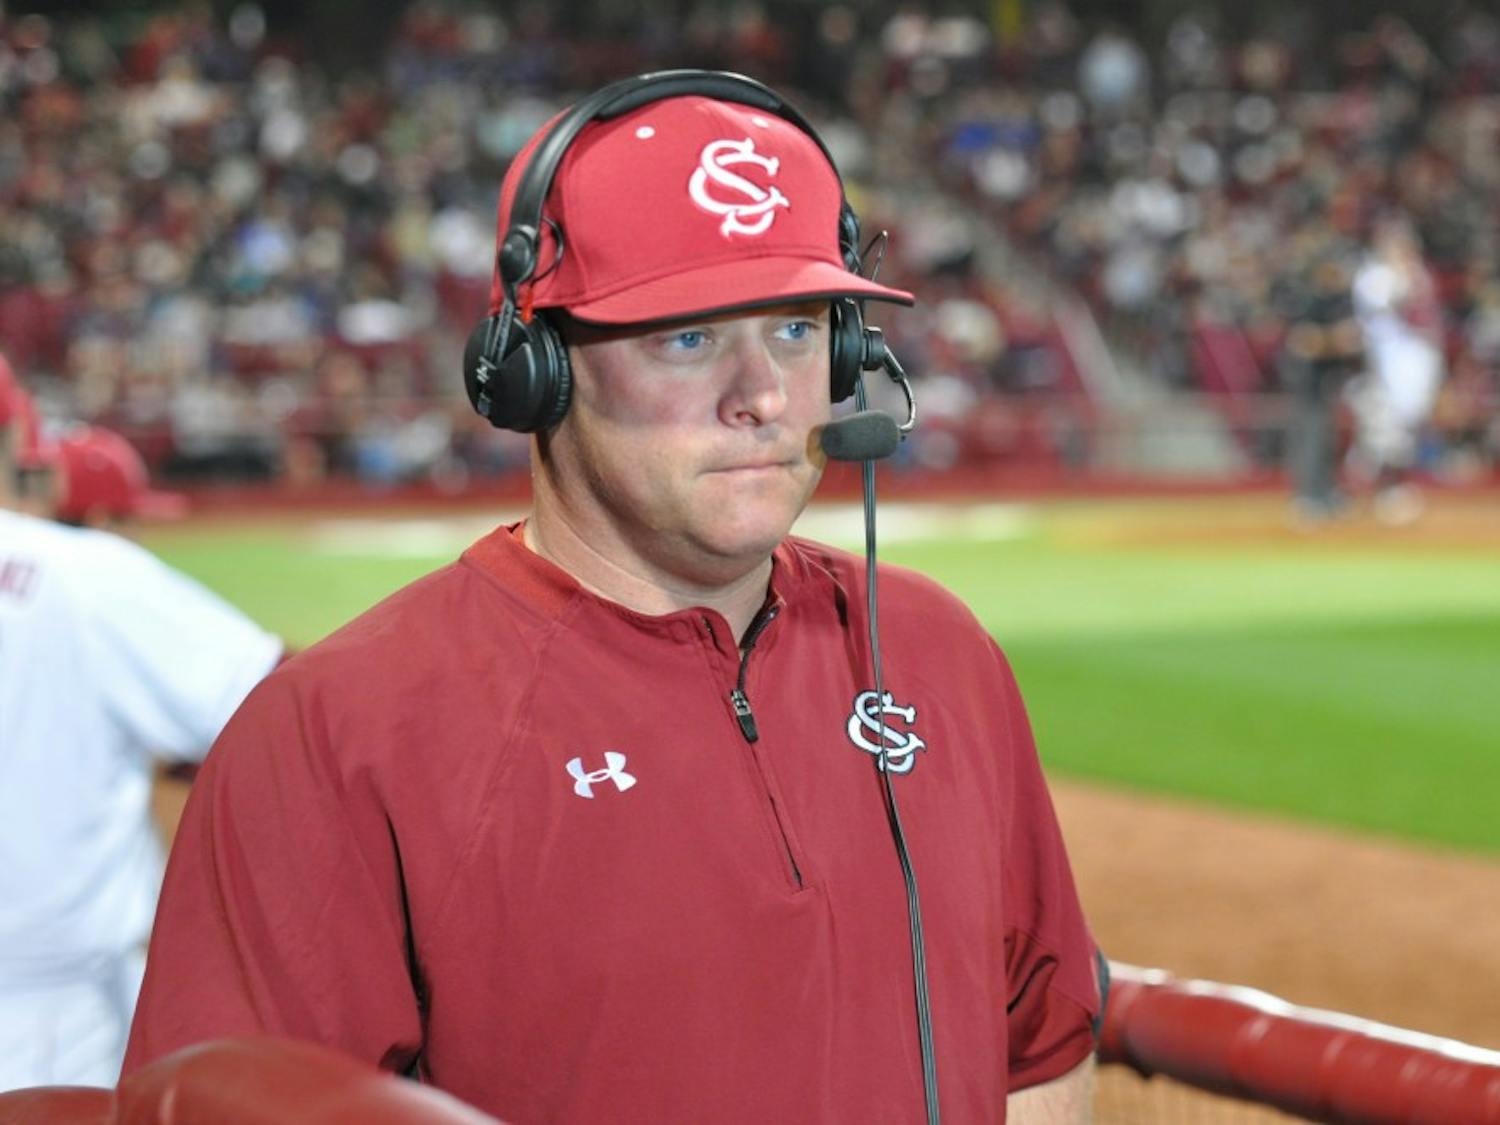 	In his first season as head coach, Chad Holbrook took the Gamecocks one game short of a College World Series appearance. He looks to expand on that success in year-two.